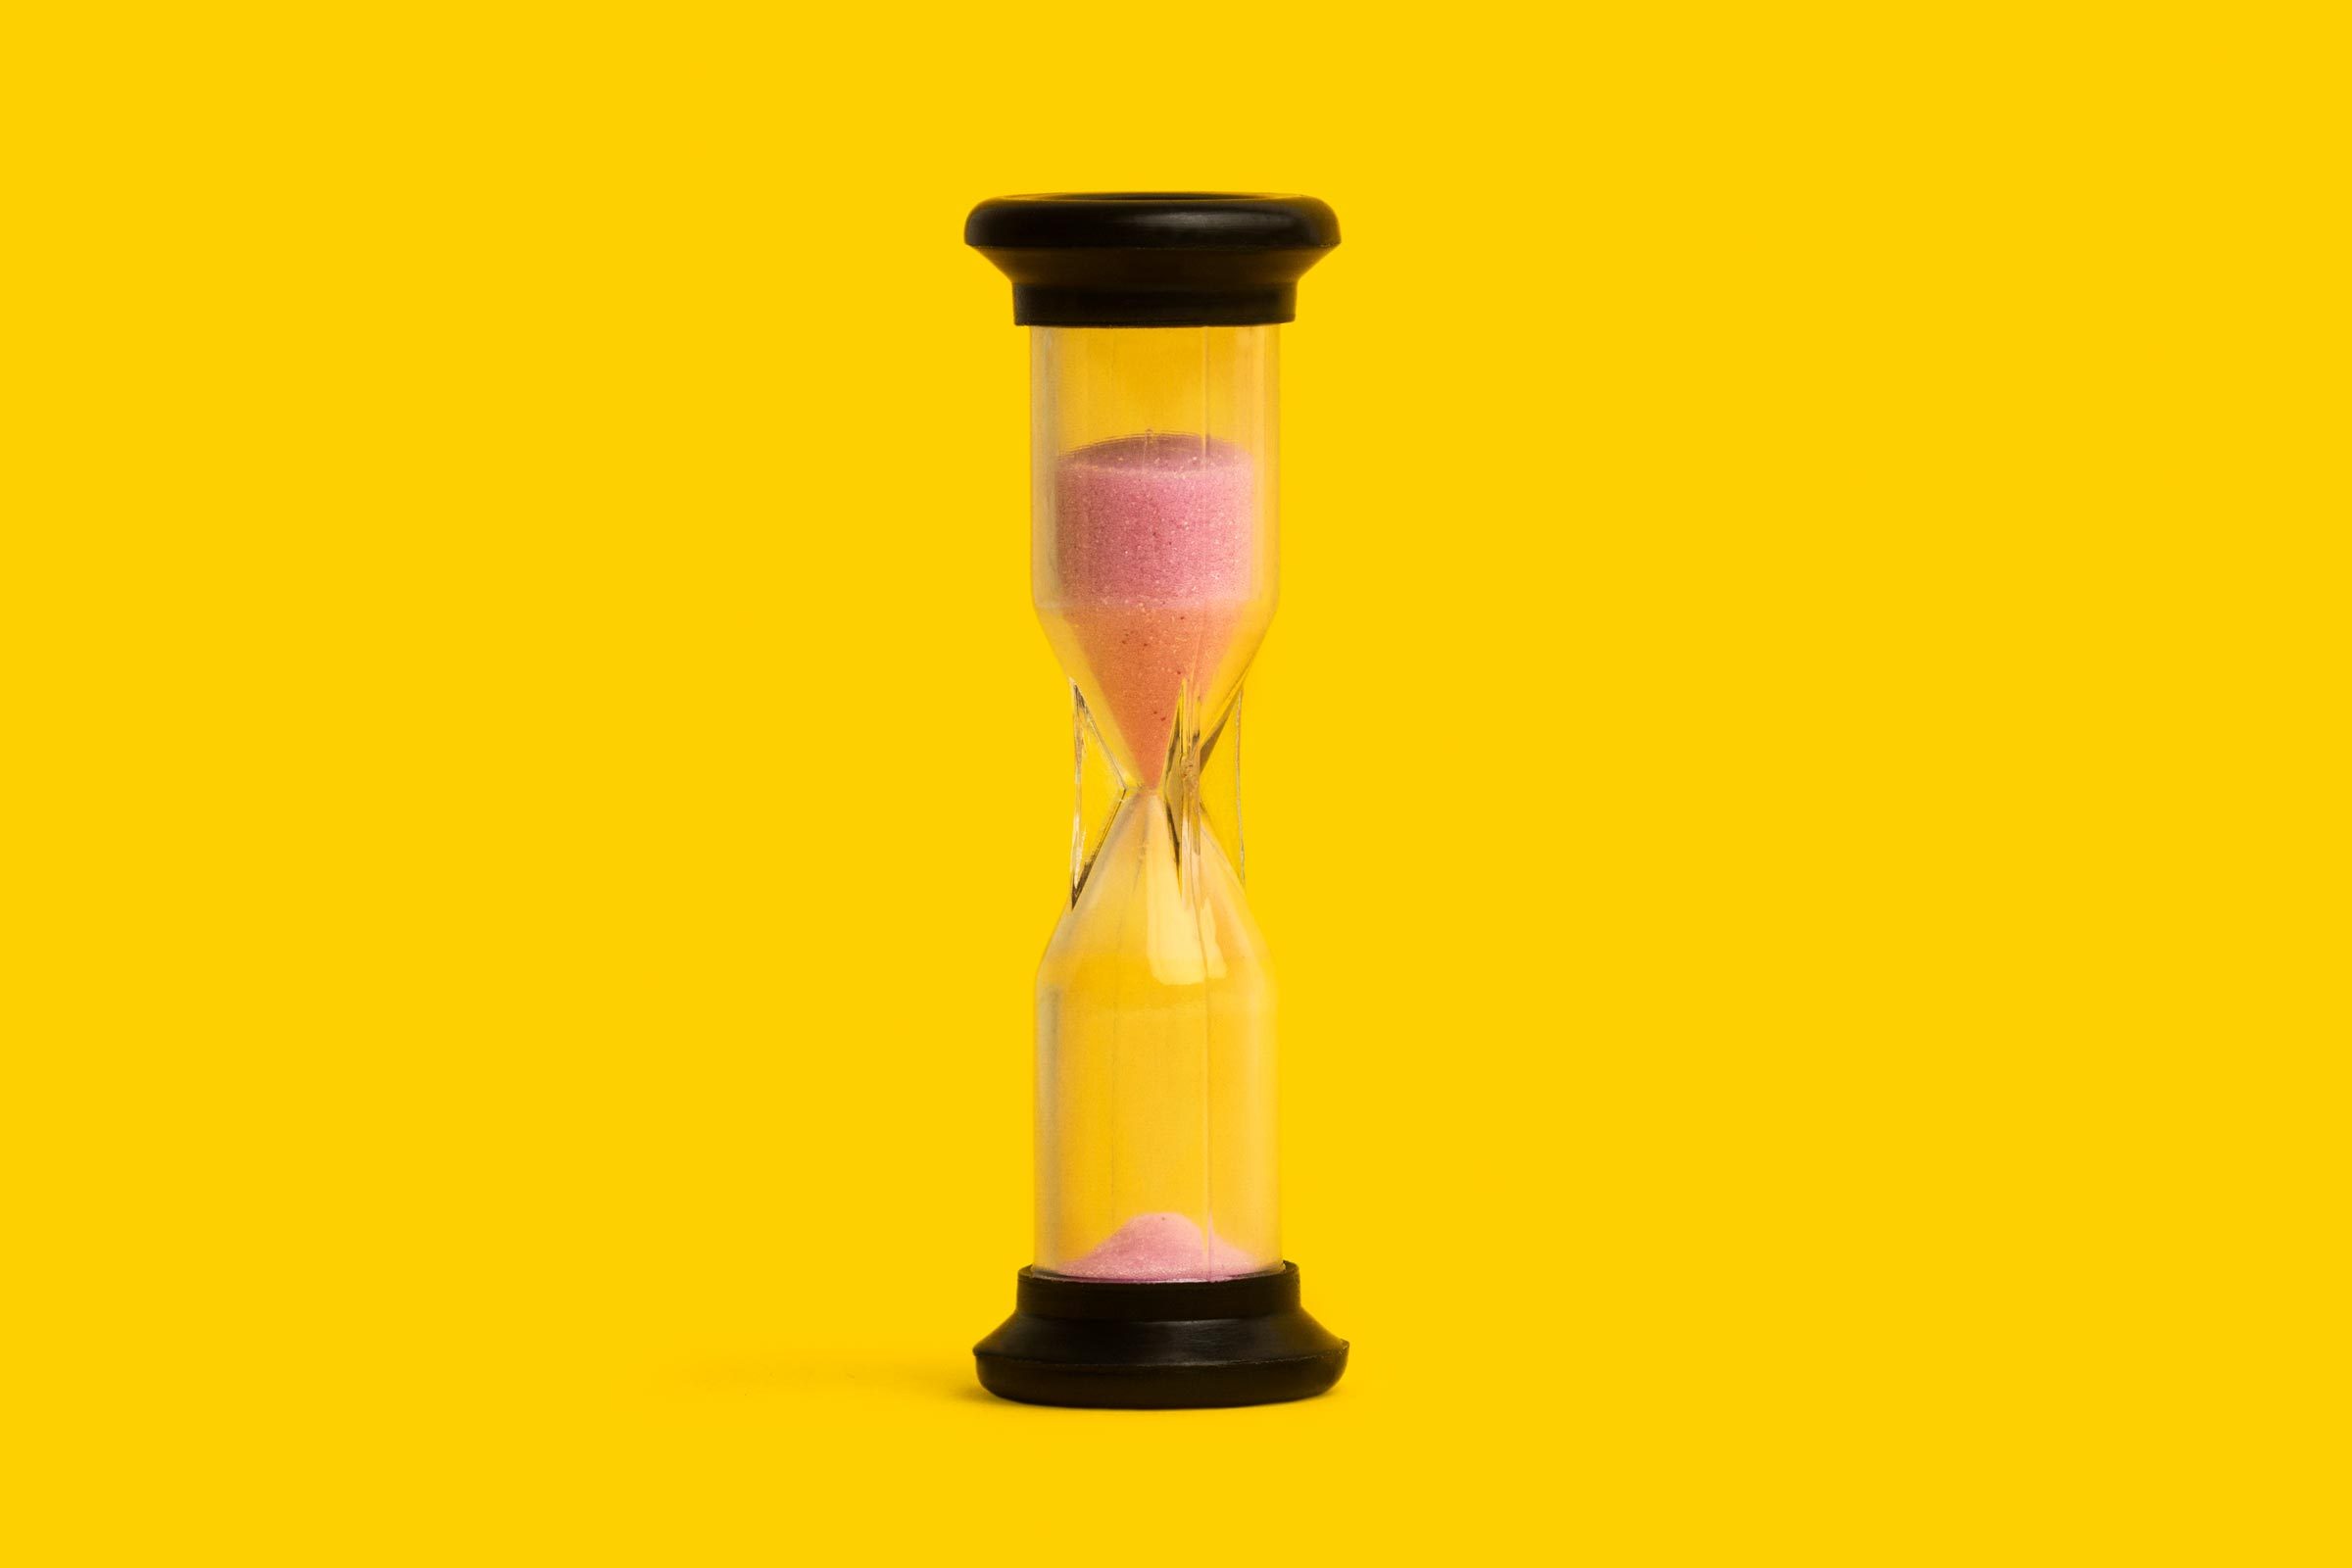 Hour Glass on yellow background